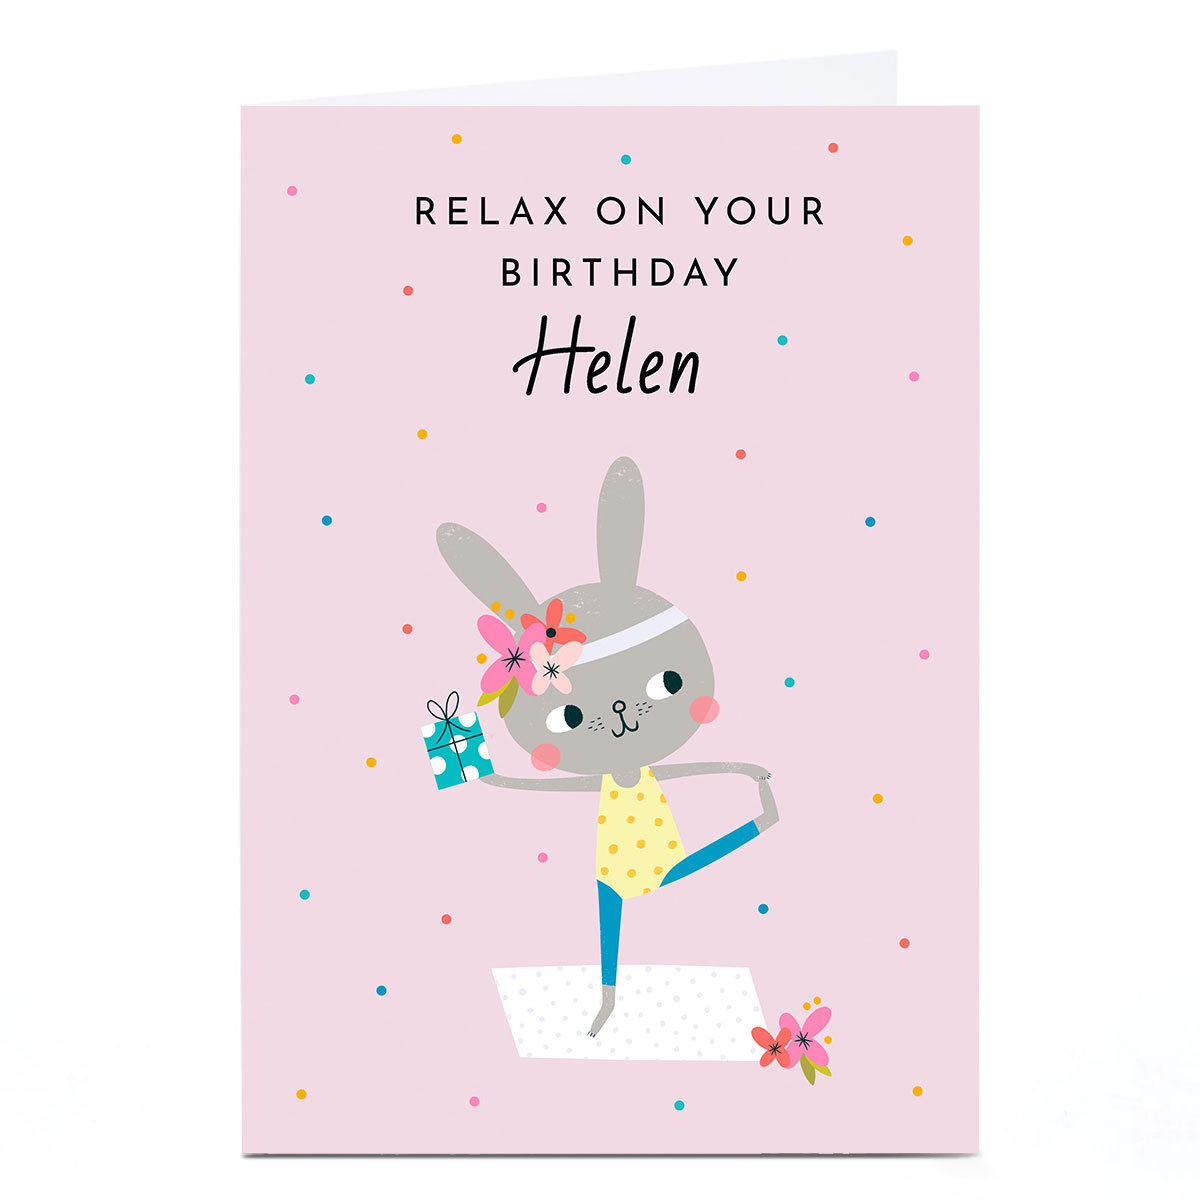 Personalised Lemon & Sugar Card - Relax On Your Birthday 